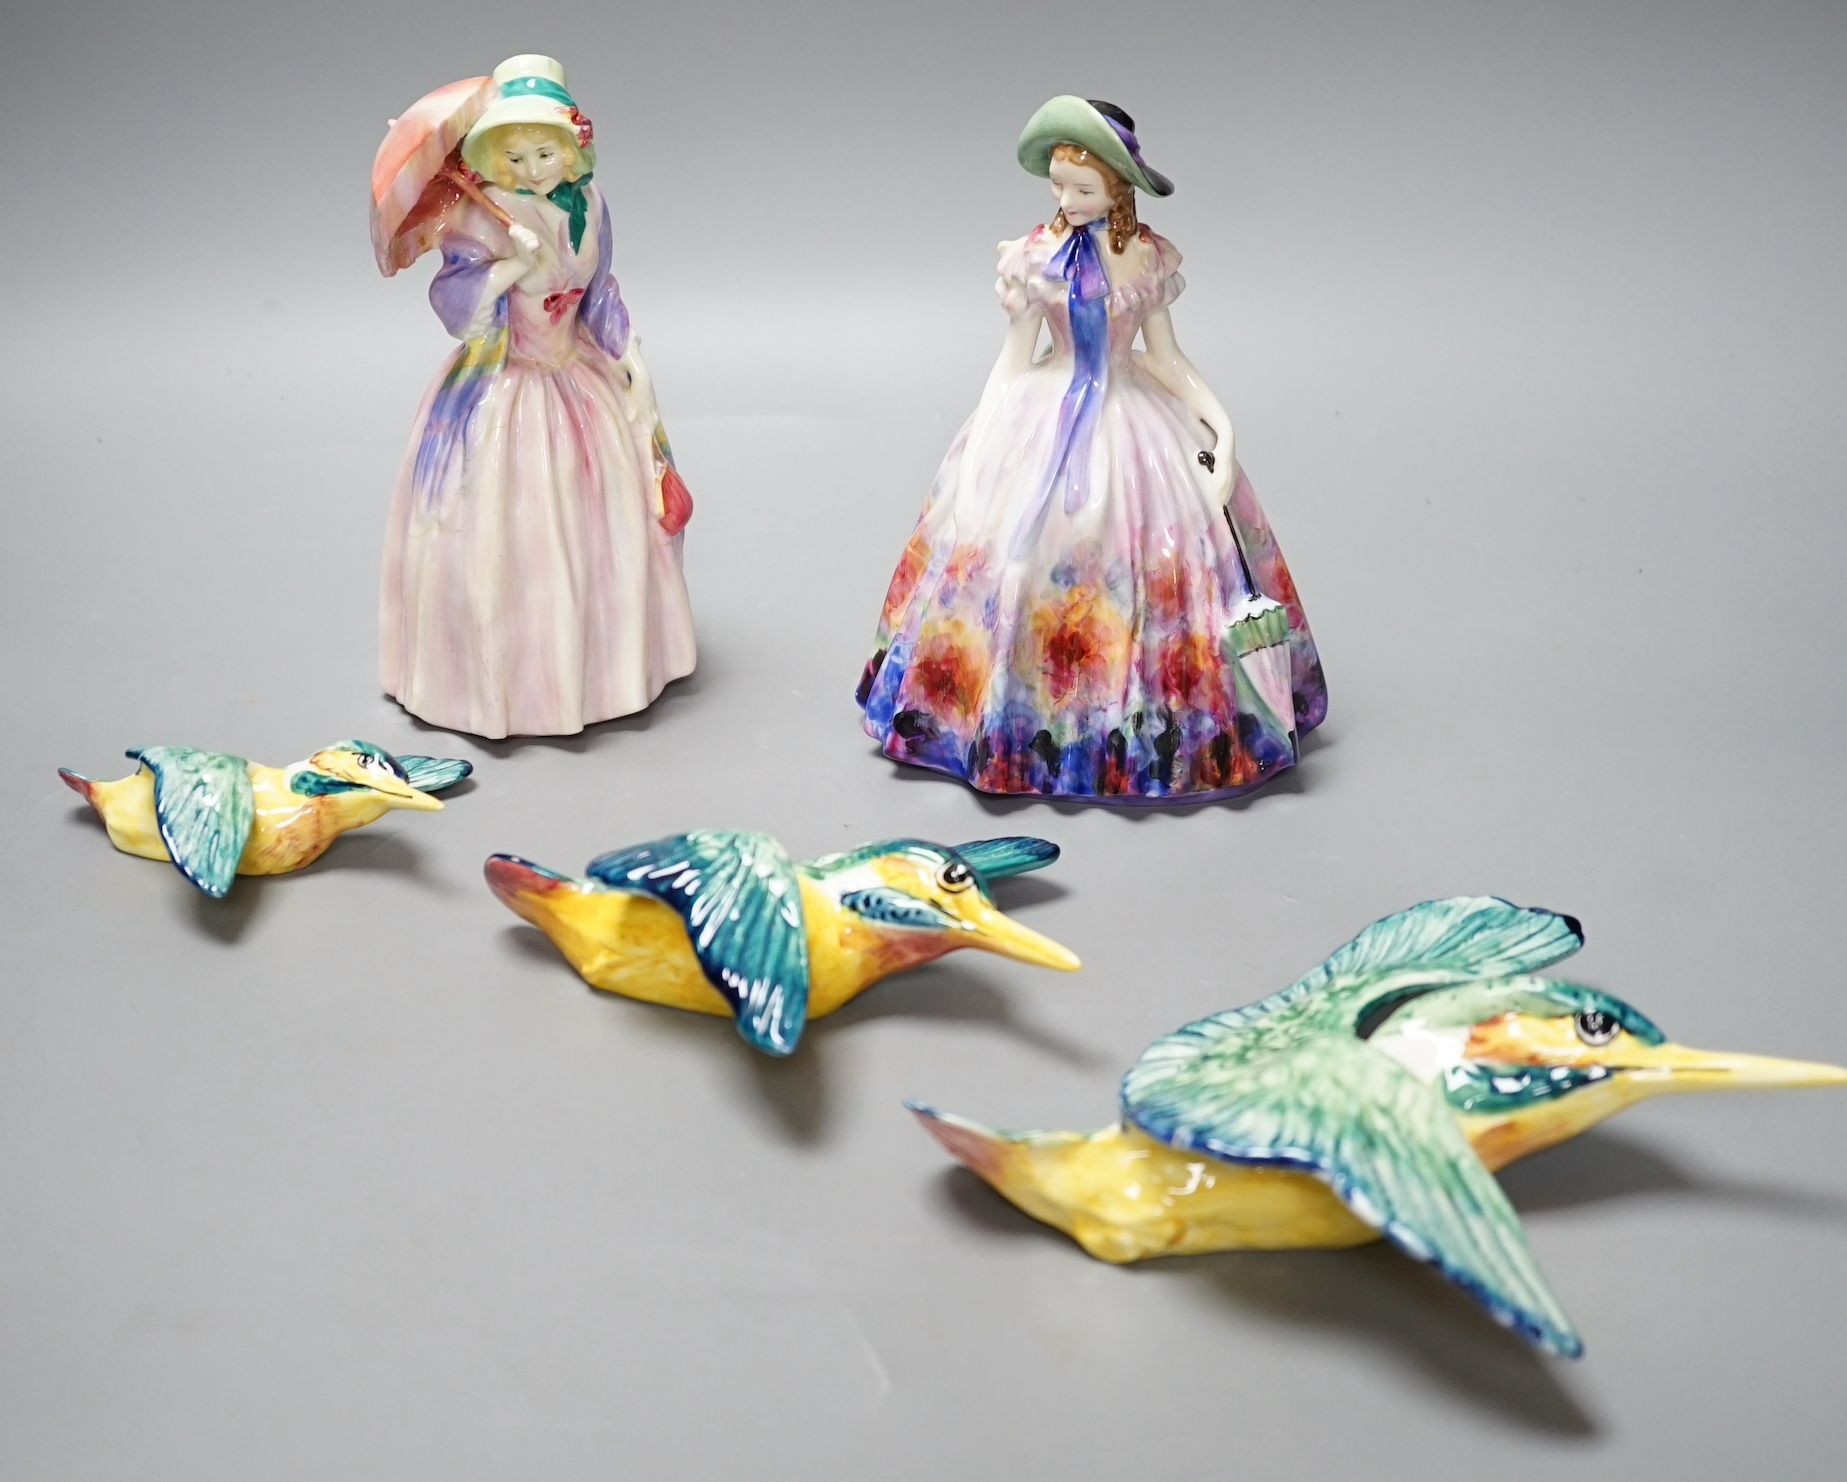 A Royal Doulton figurine: Reg No753474, Miss Demure and an Easter Day figurine: HN 2039, together with three Beswick Kingfisher wall plaques